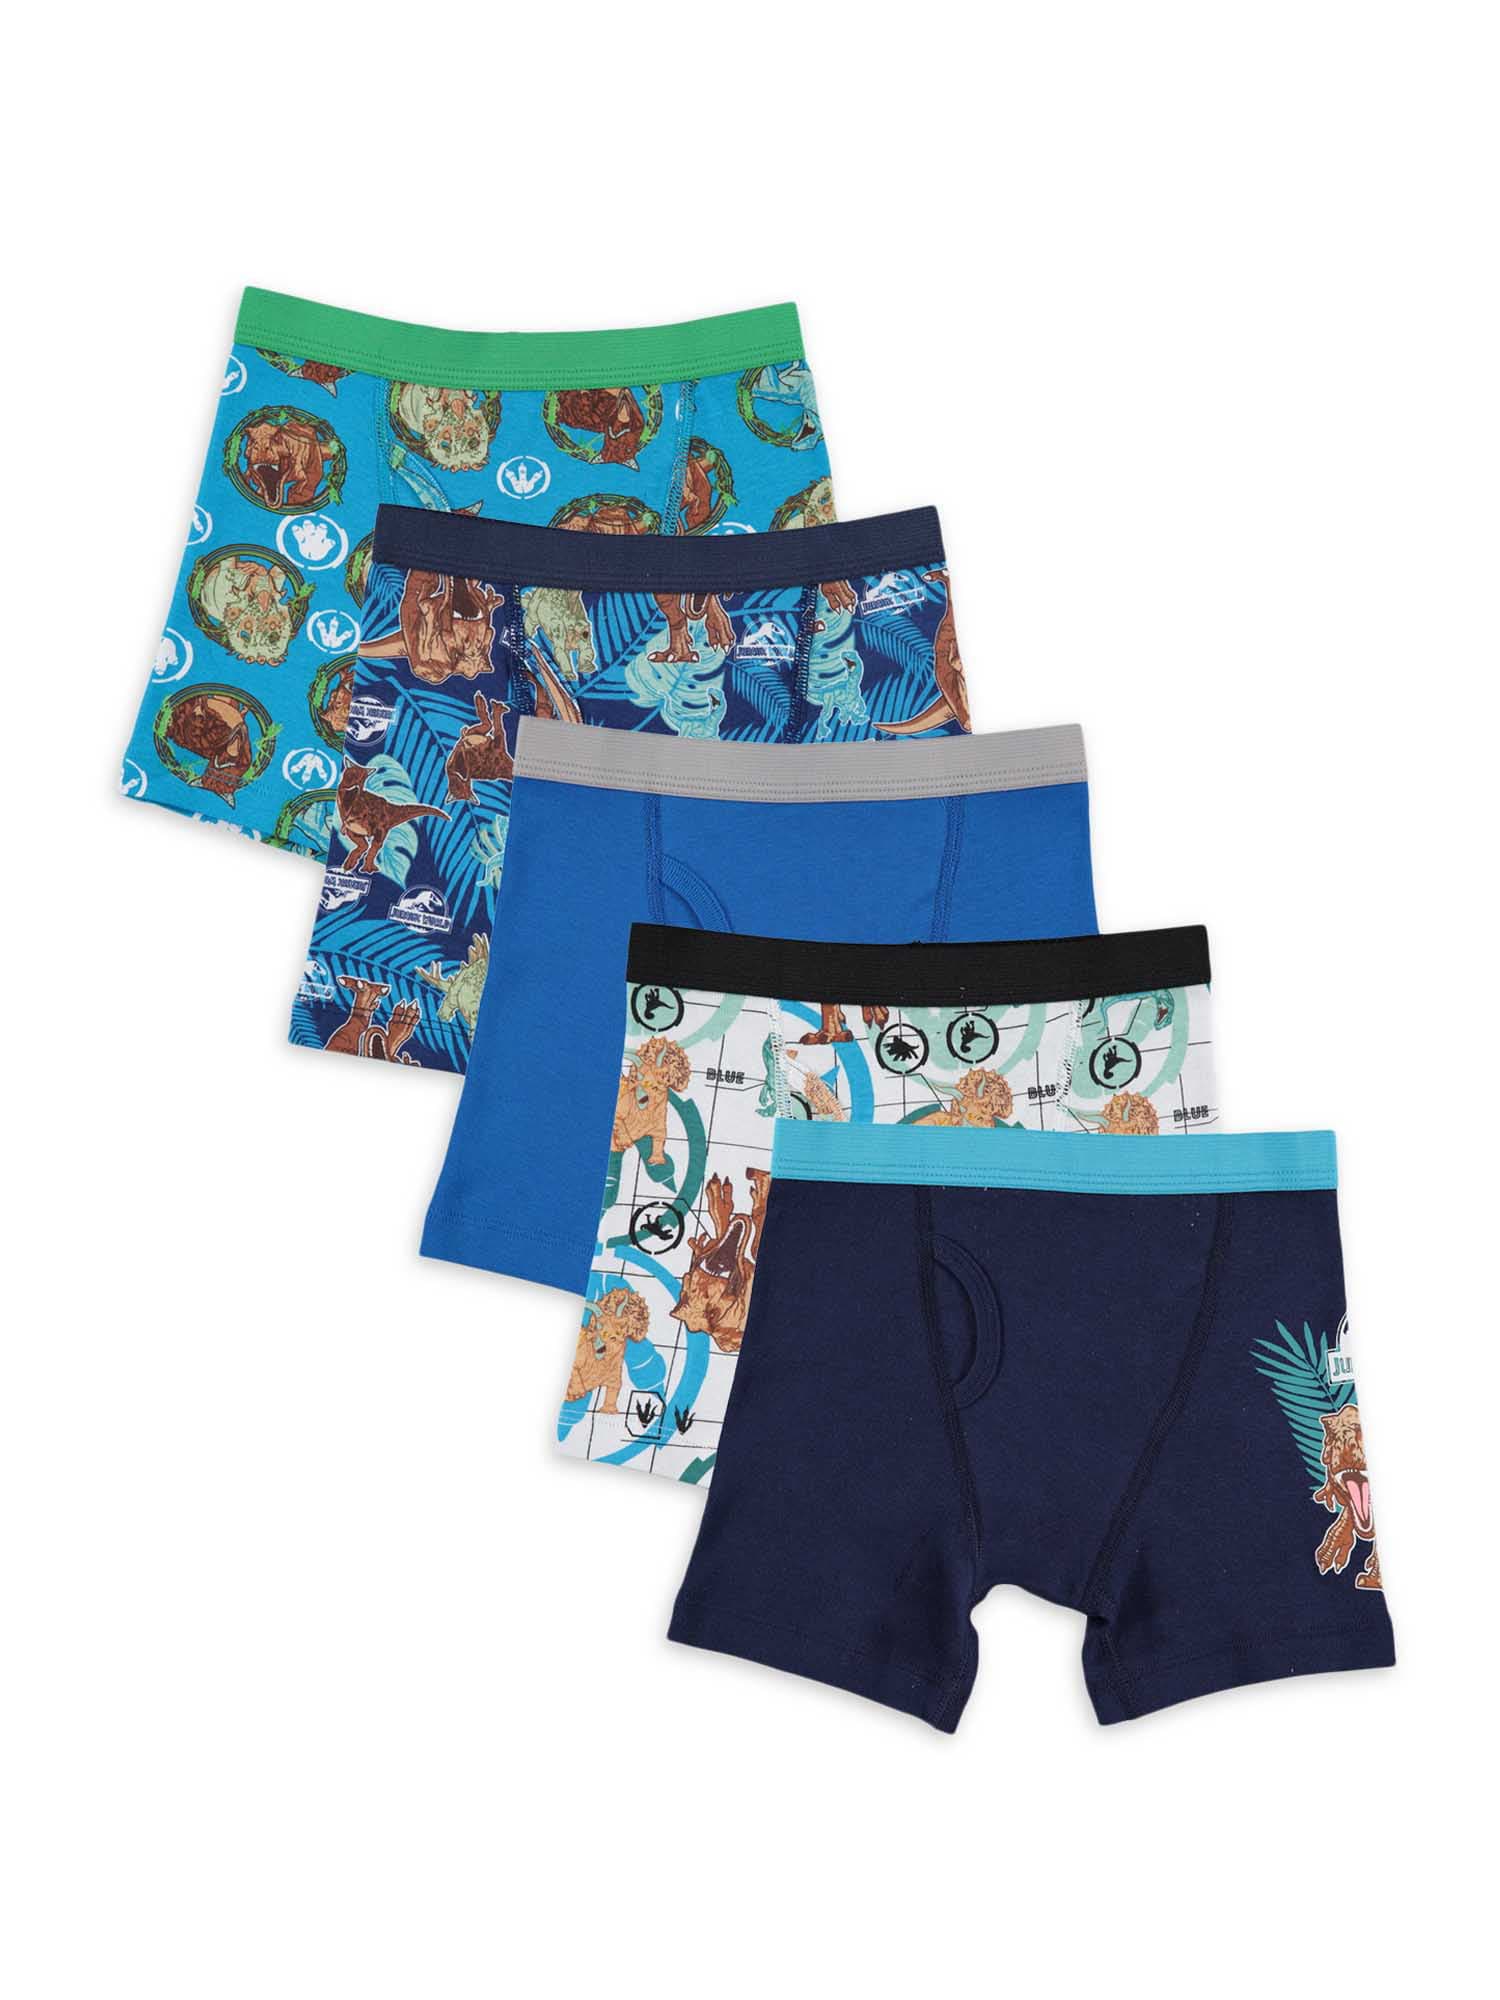 Athletic Works Boys Boxer Brief, 5-Pack, Sizes S-XXL & Husky - DroneUp  Delivery